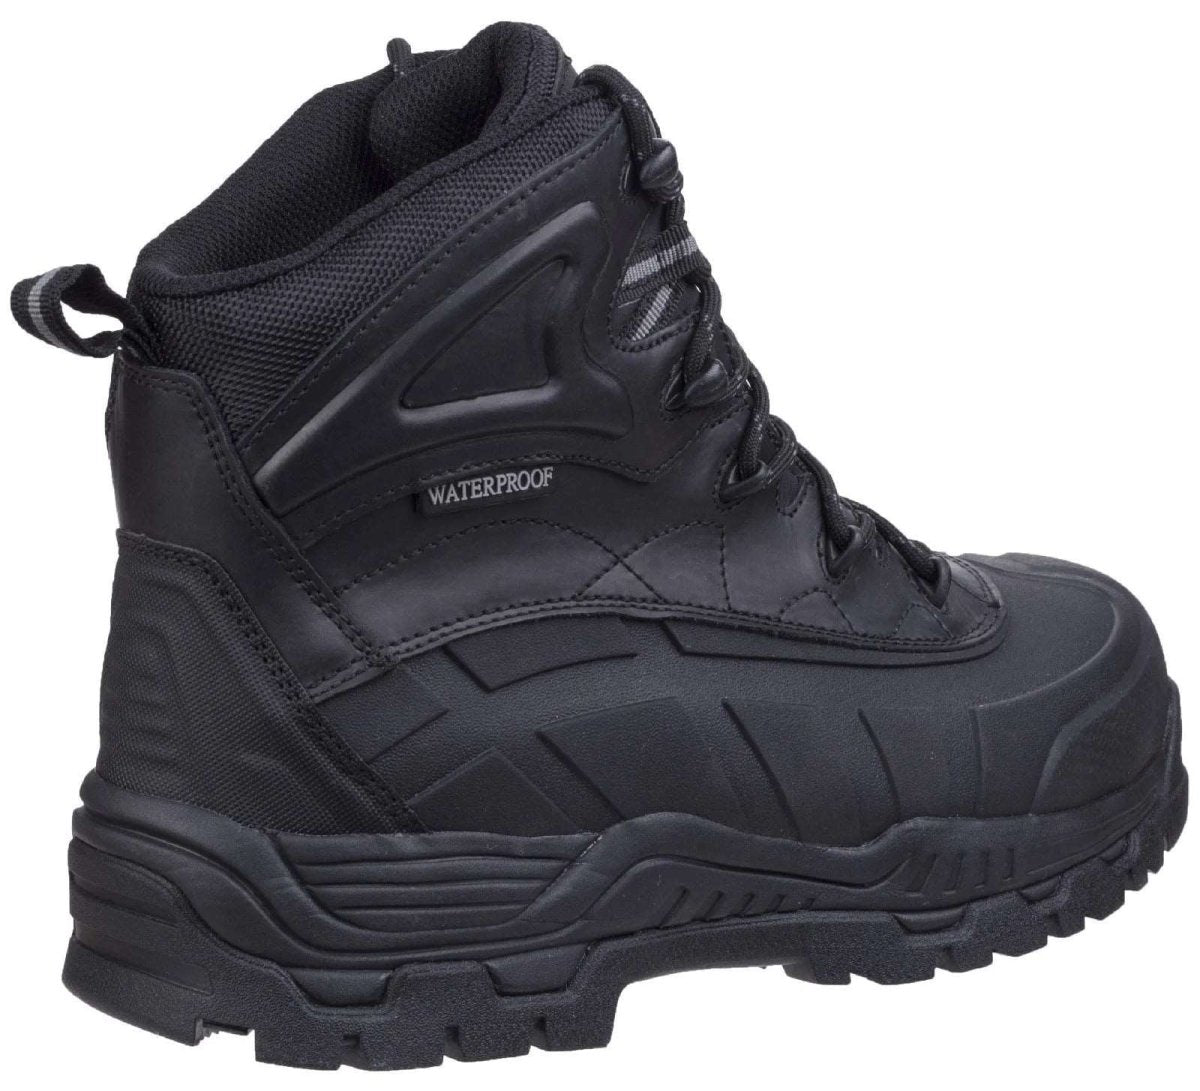 Amblers FS430 Orca Mens Waterproof Safety Boots - Shoe Store Direct